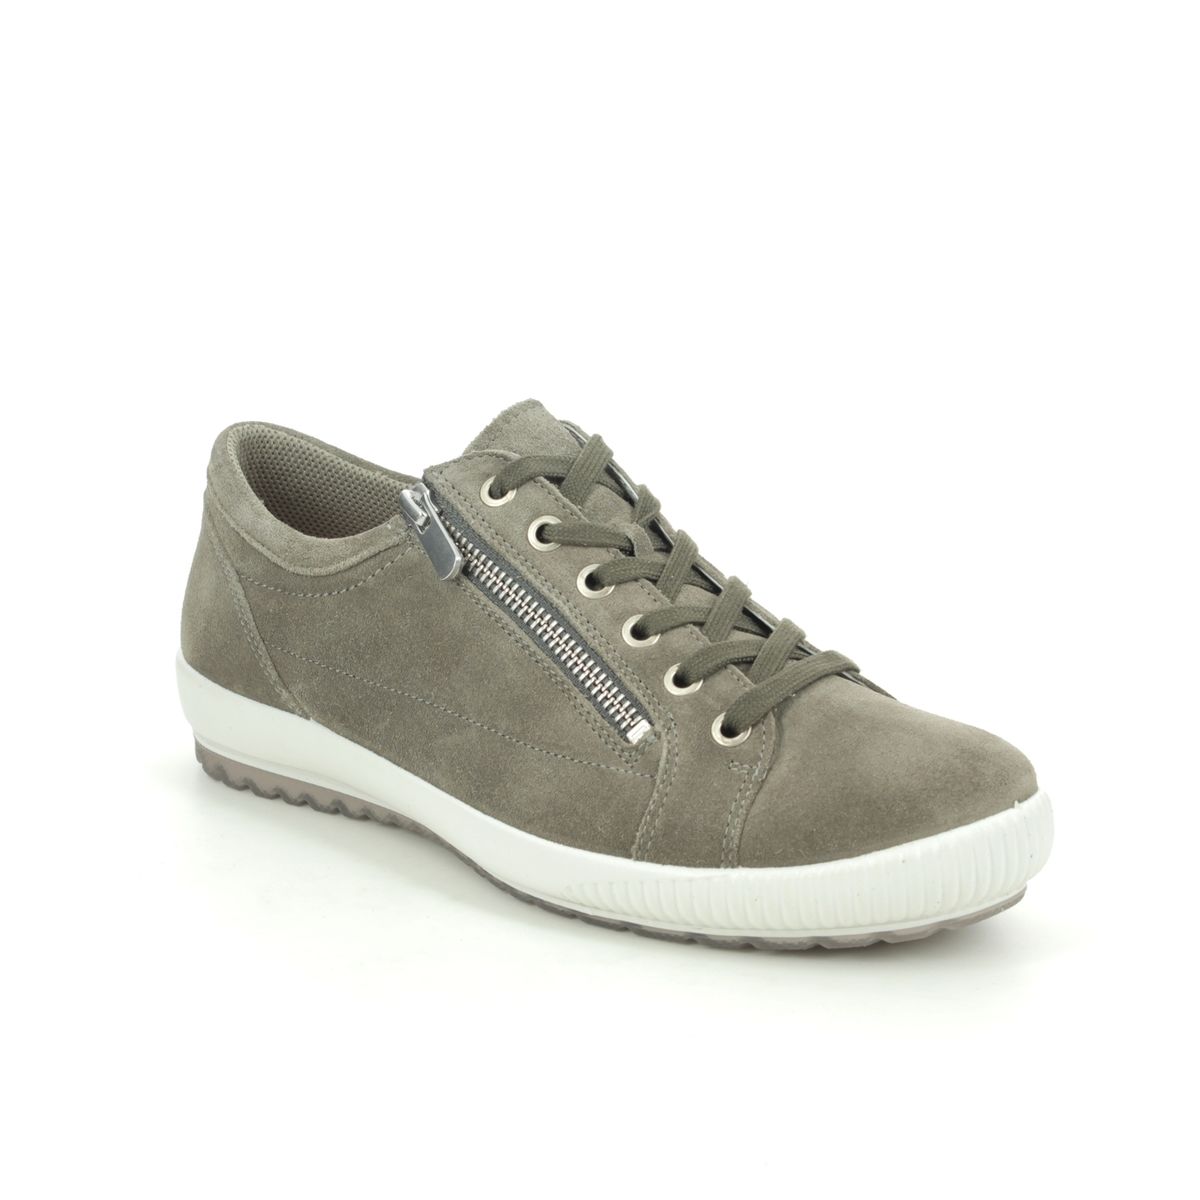 Legero Tanaro Zip Taupe suede Womens lacing shoes 0600818-7600 in a Plain Leather in Size 9